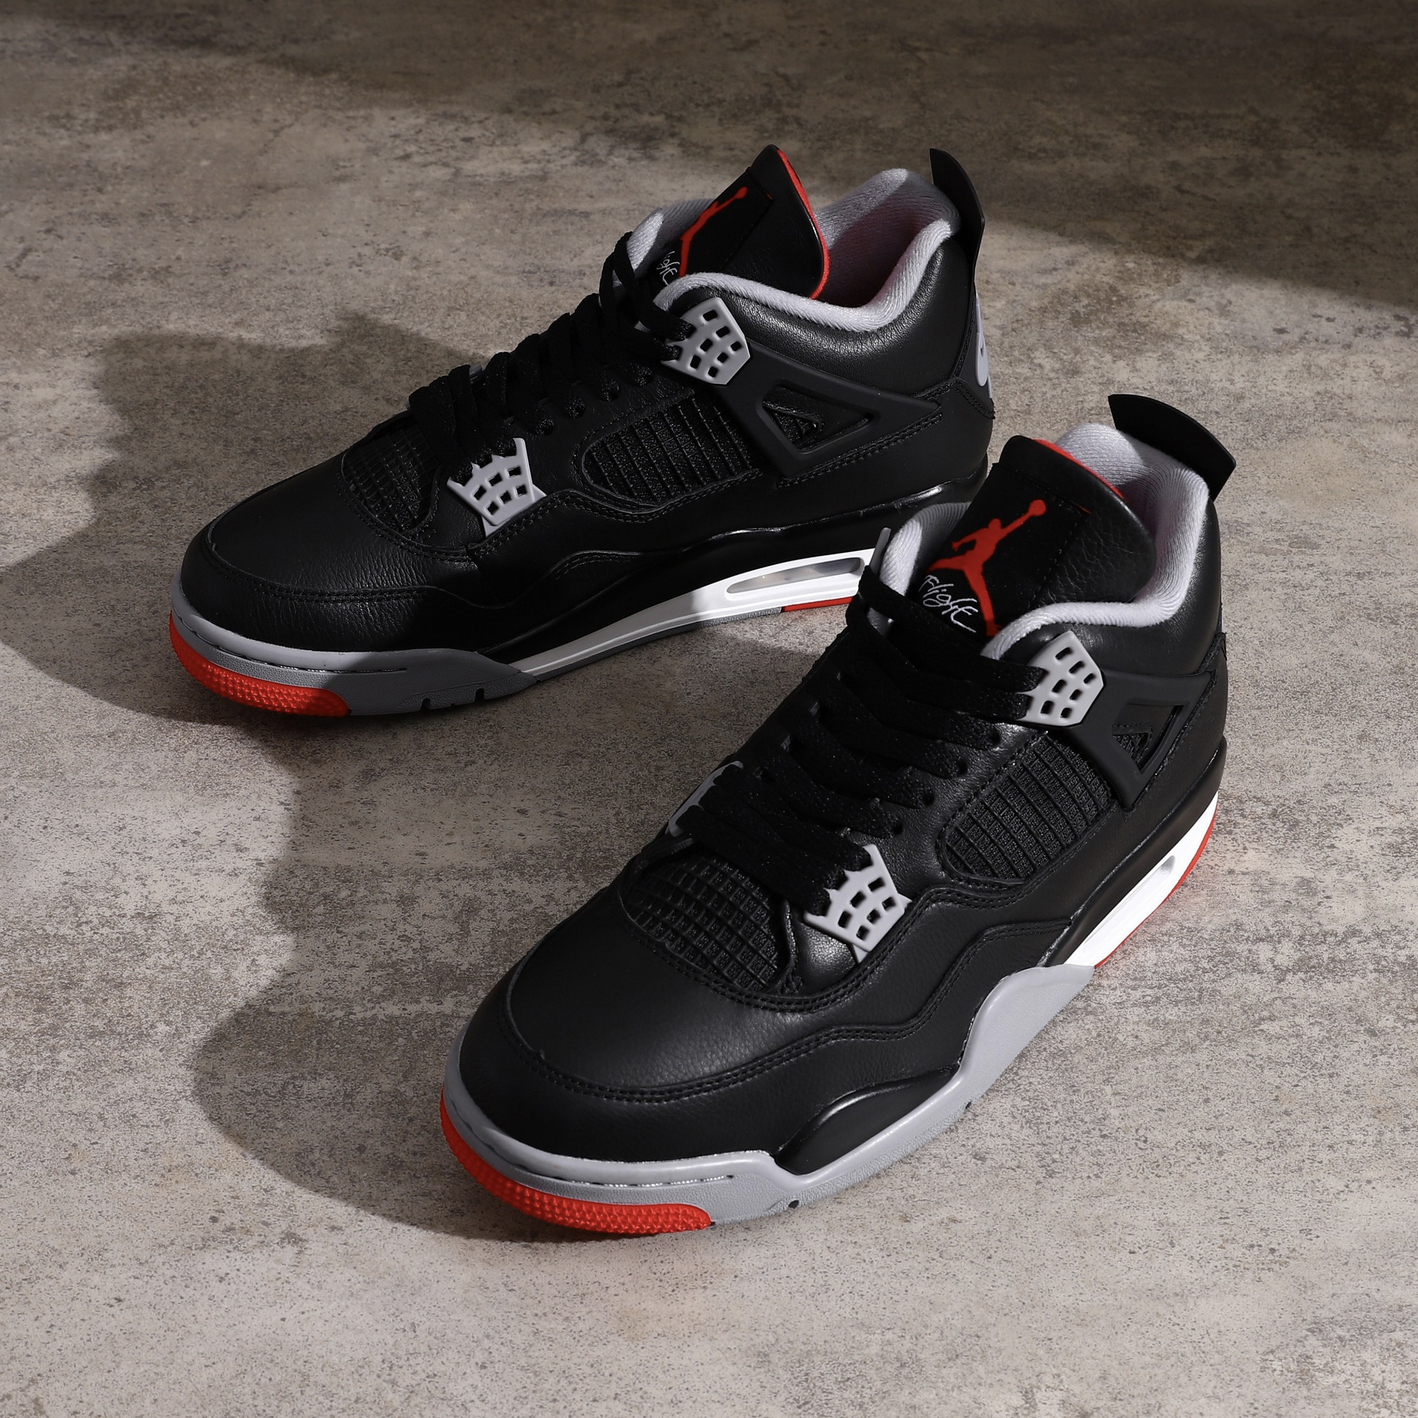 BAIT on X: The Air Jordan 4 Bred Reimagined is available today via FCFS in  store at select BAIT locations. Follow your local store on IG for  availability. Online raffle winners will